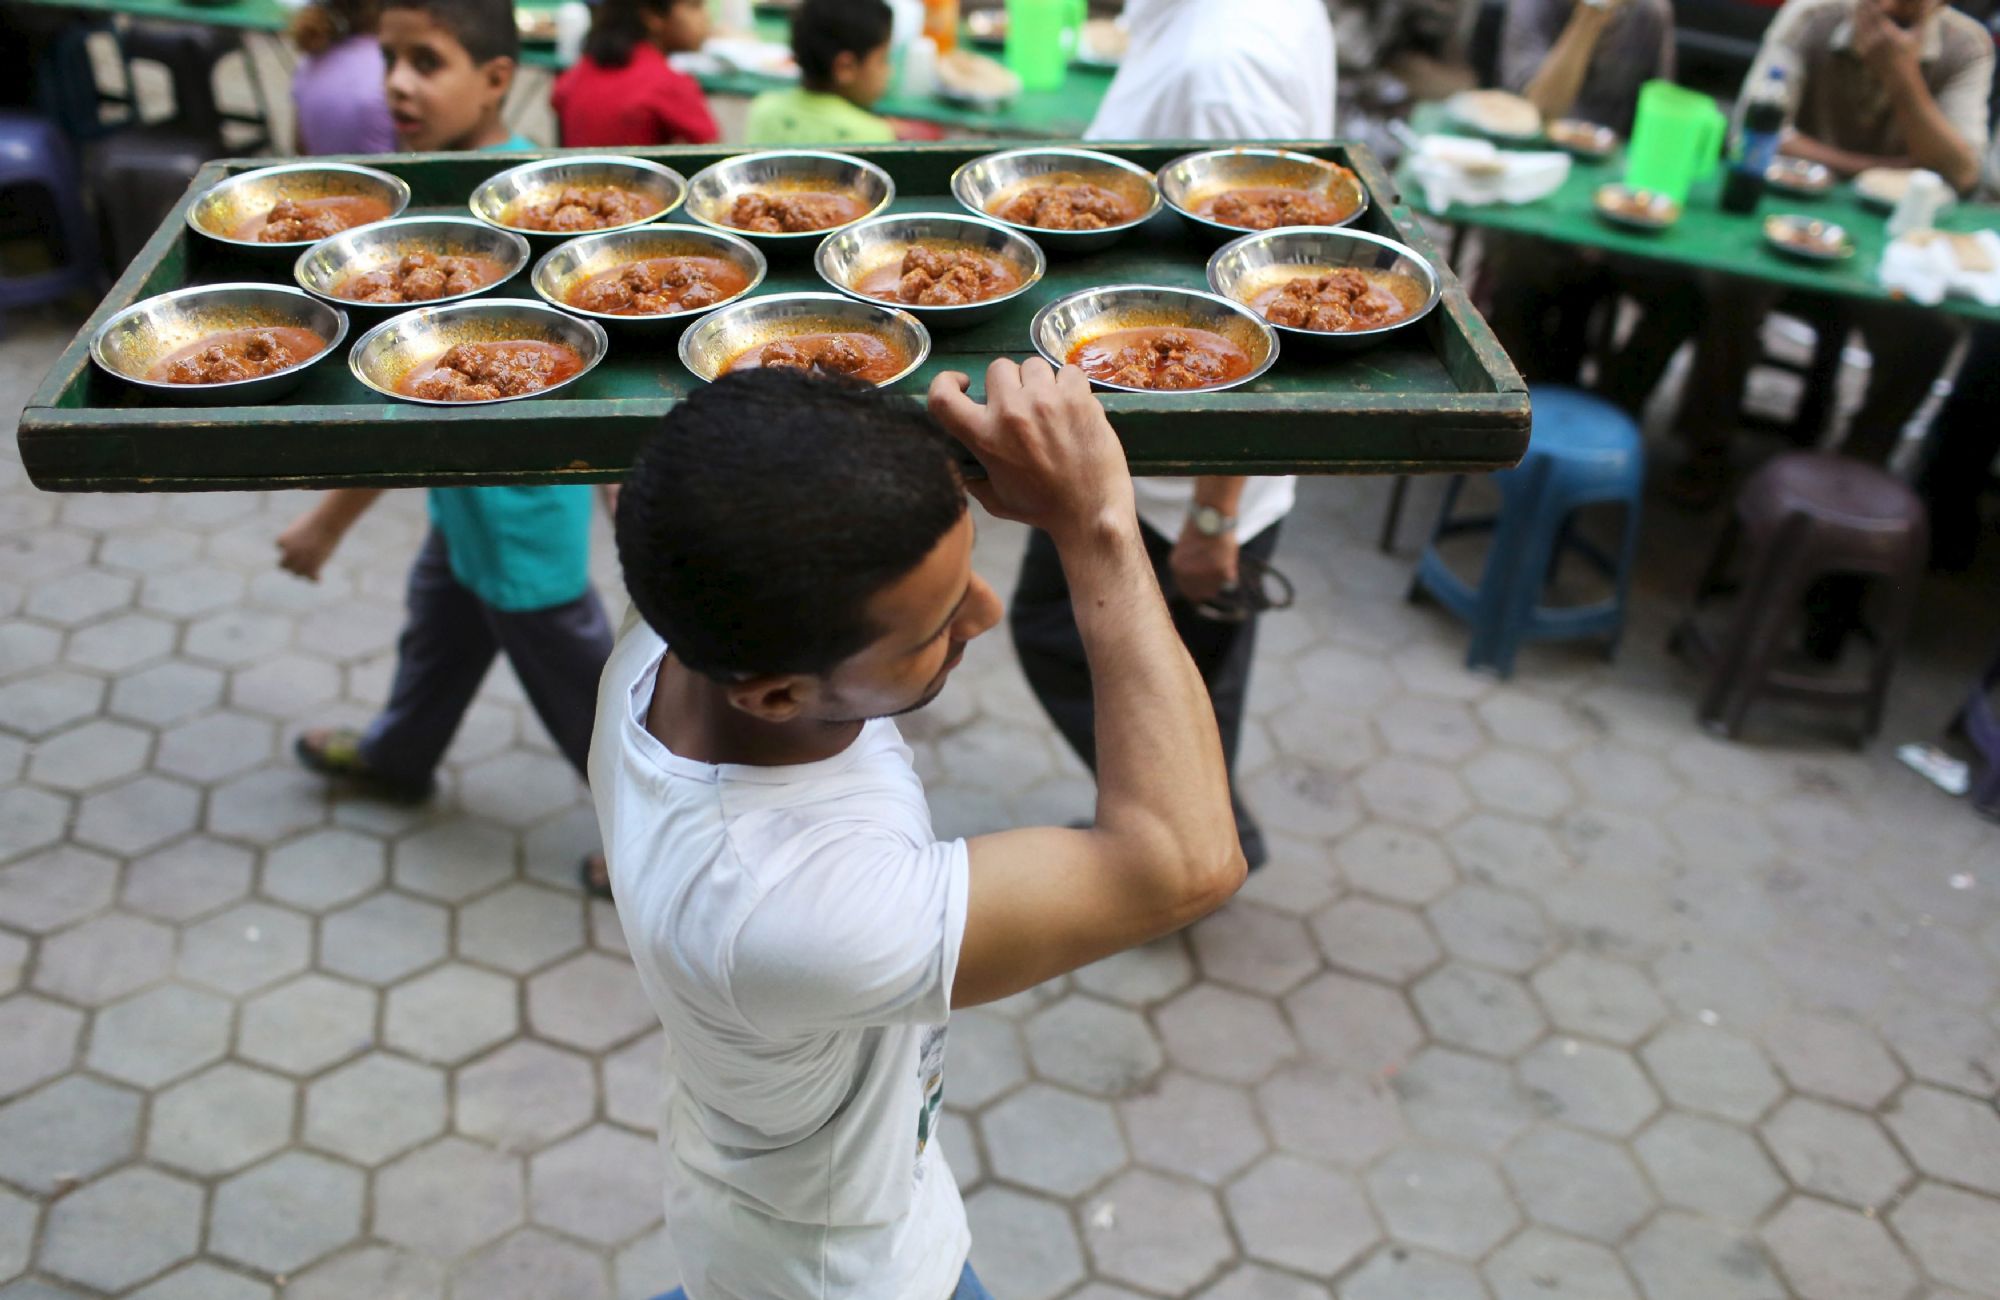 A volunteer carries food to charity tables in Cairo